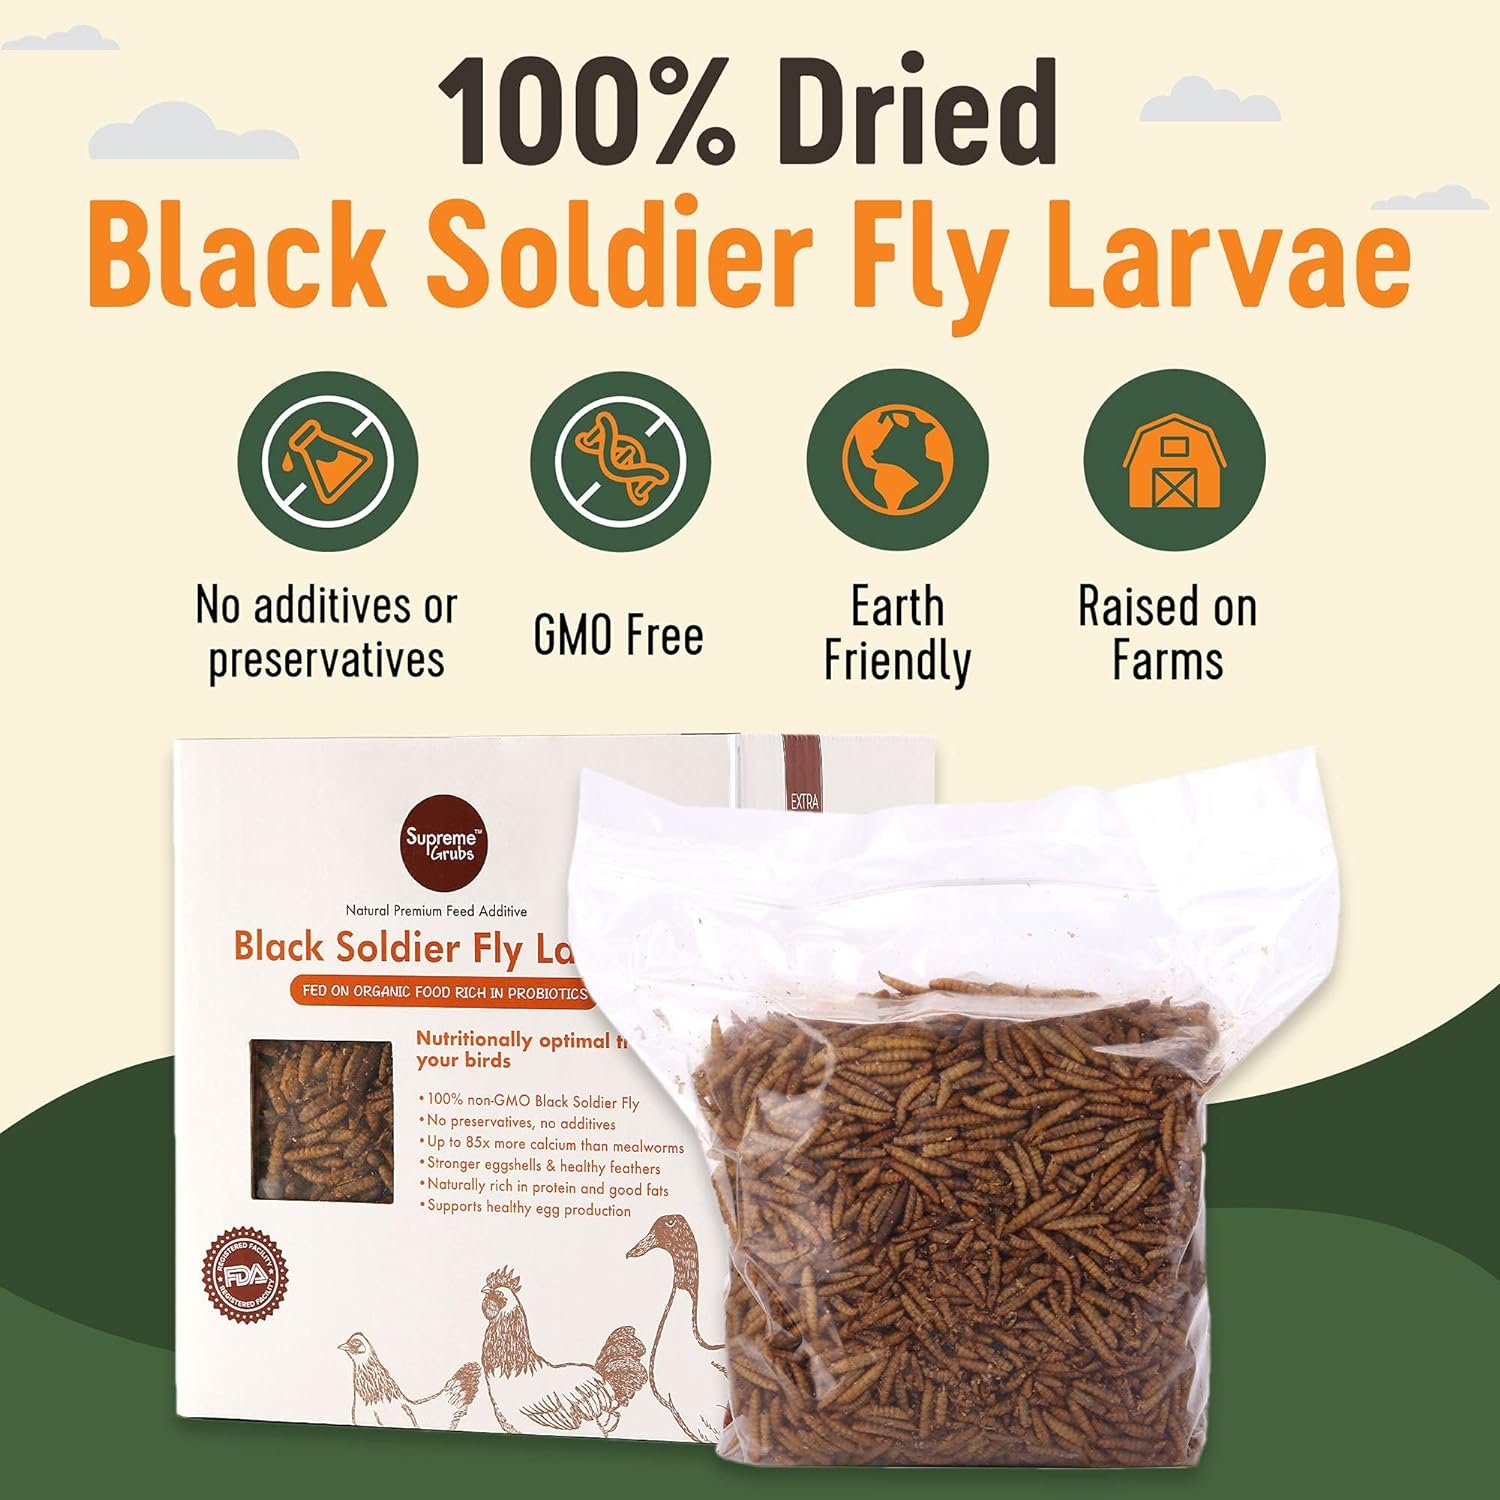 Supreme Grubs Natural Black Soldier Fly Larvae for Chickens, 85X More Calcium Than Mealworms-High Protein Grub Food Chicken Treats for Hens, Probiotic-Rich Chicken Feed, Calcium-Dense Bird Treat 5lb